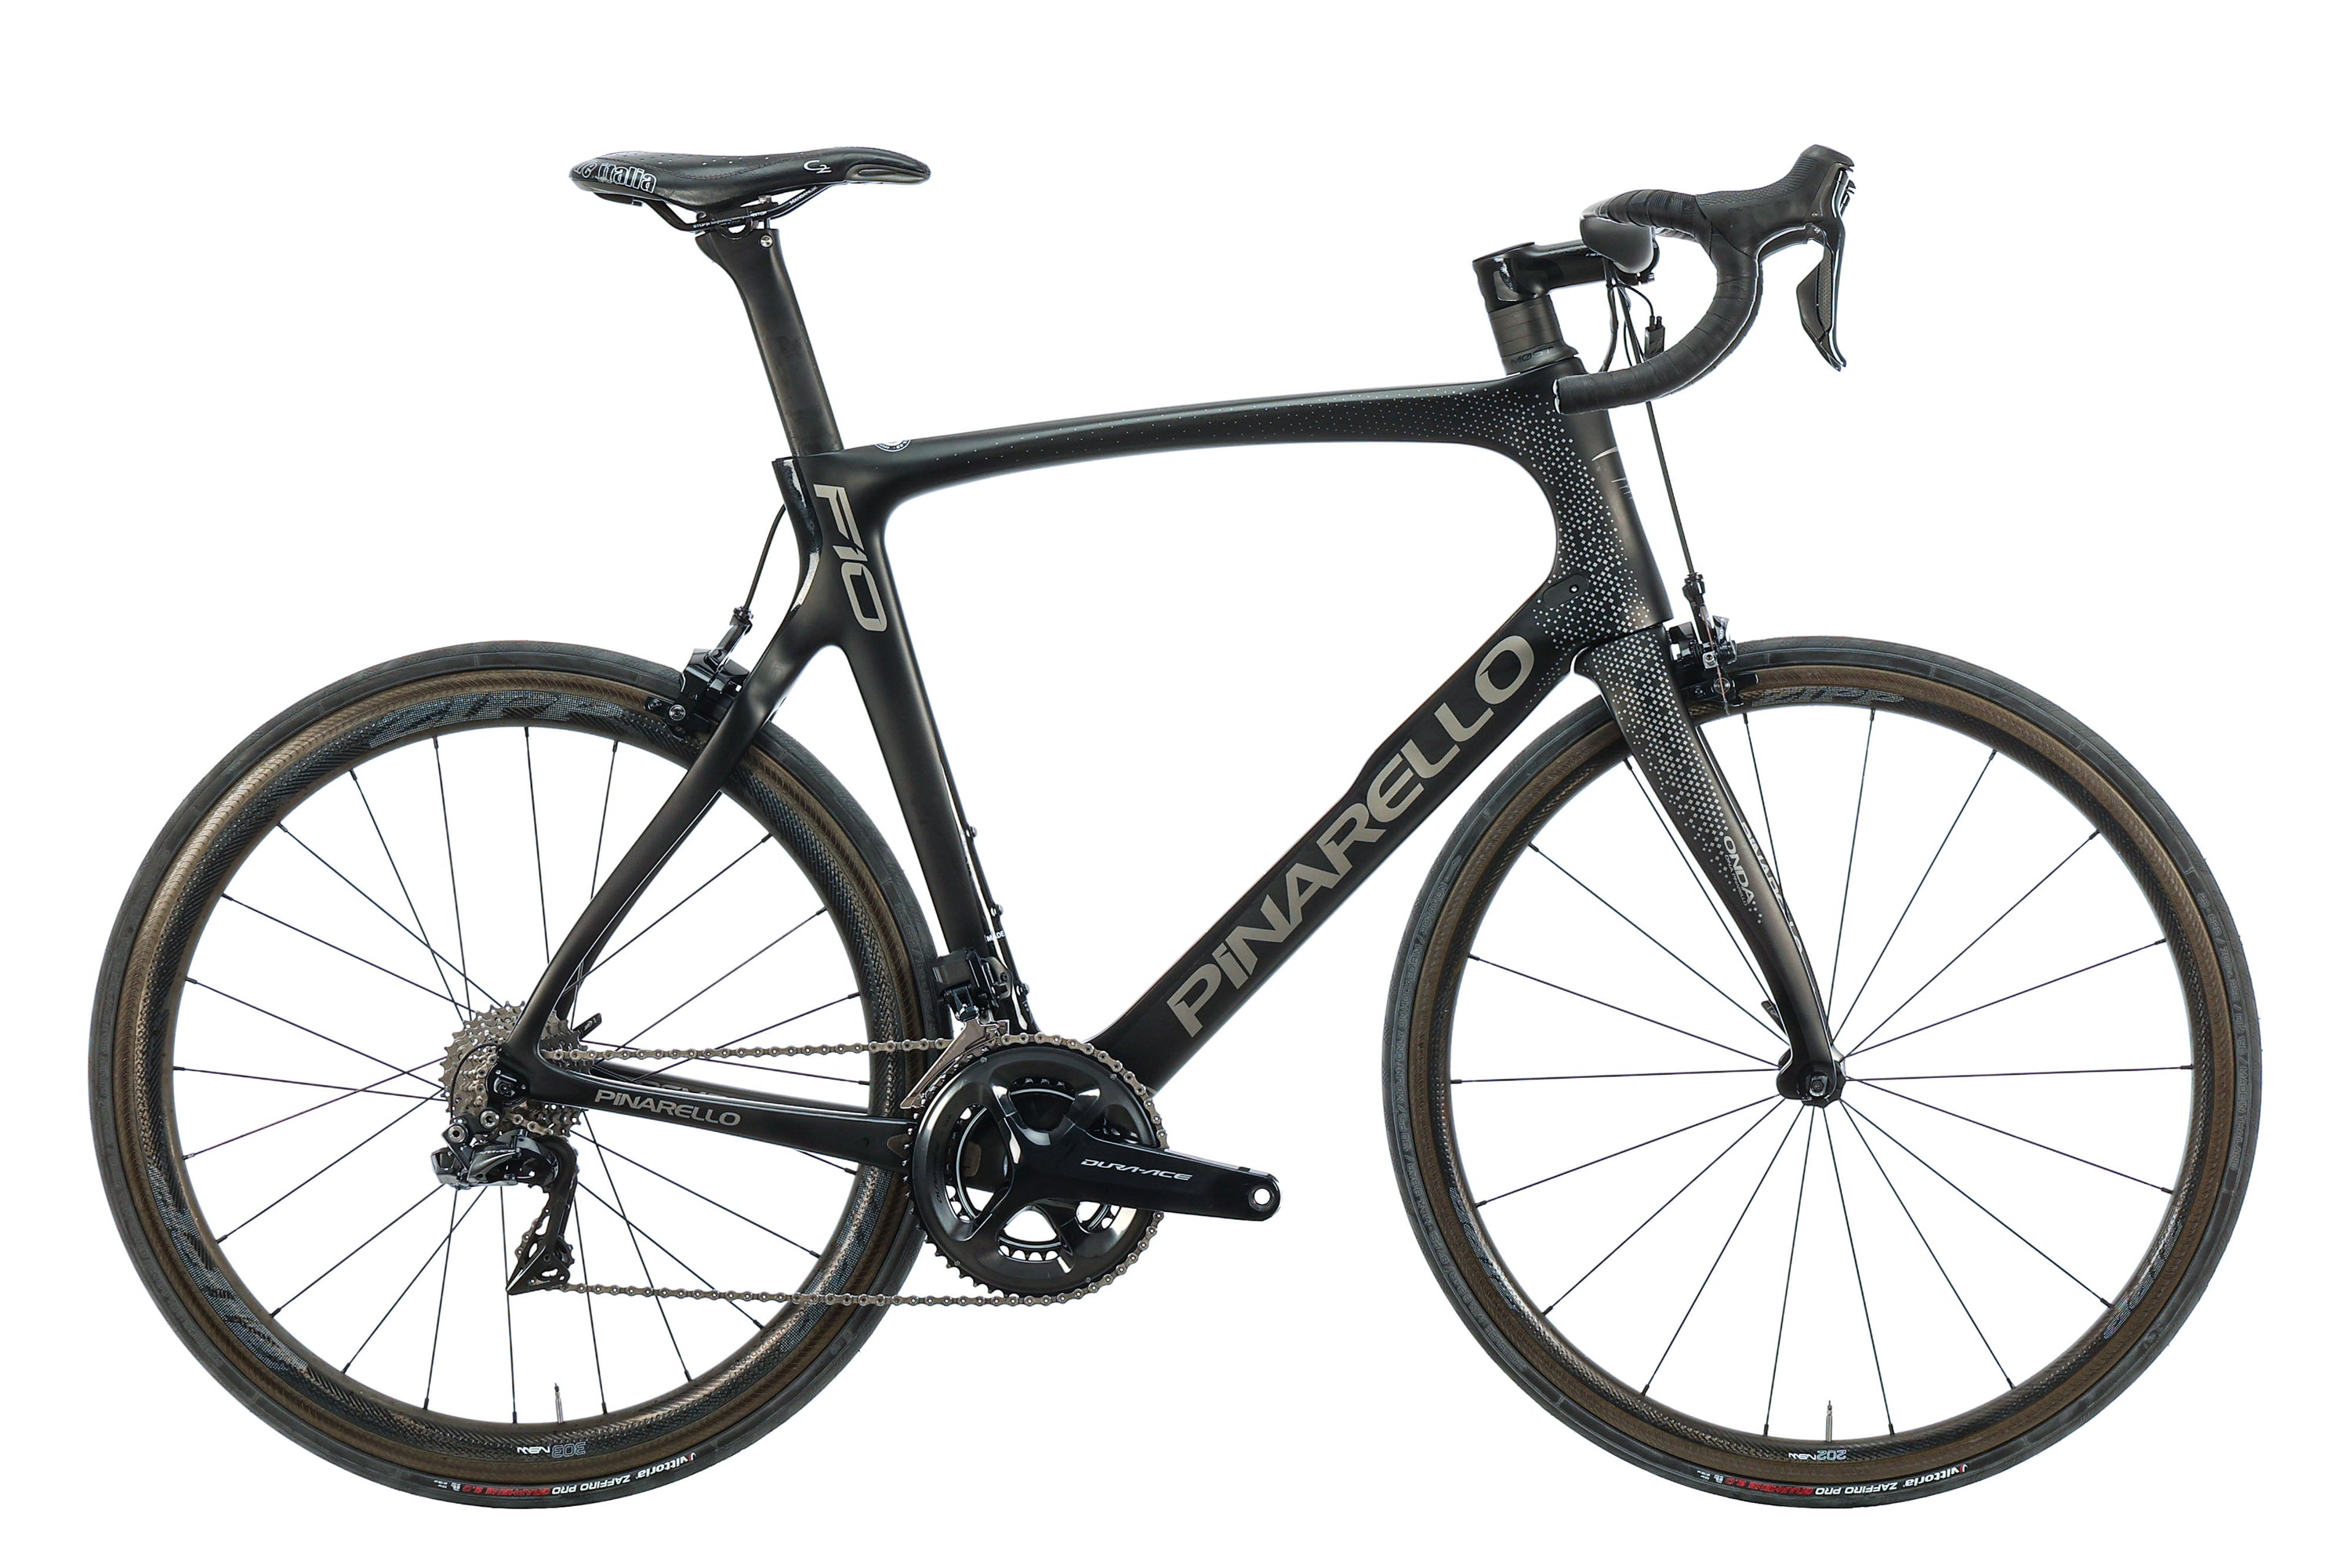 Pinarello Dogma X first ride review: A race bike with the edge